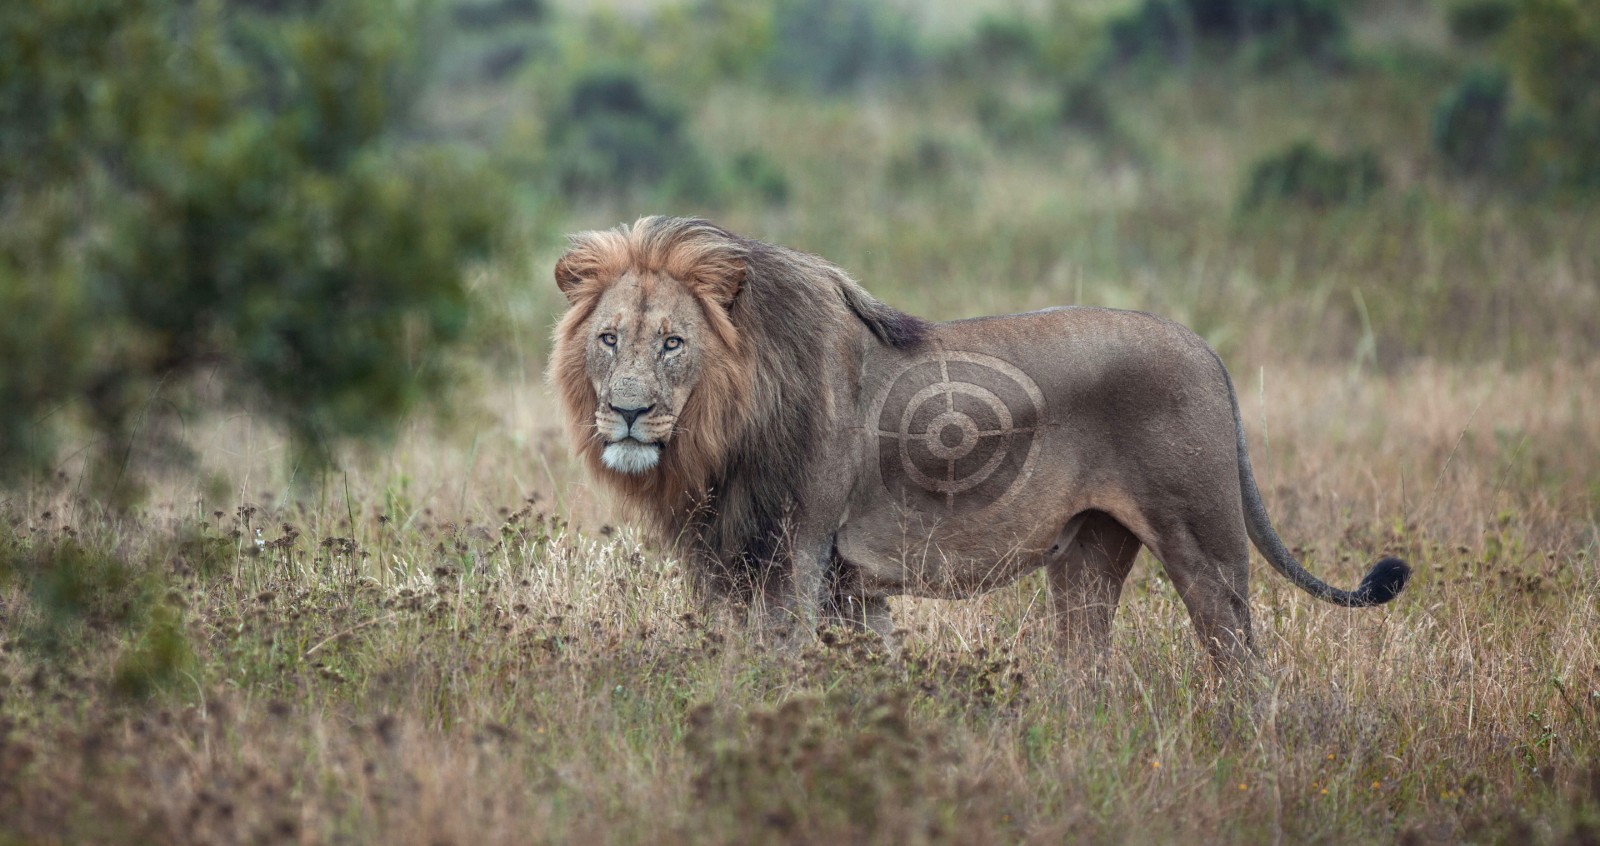 A photo of a lion which has a computer-generated target on its side.